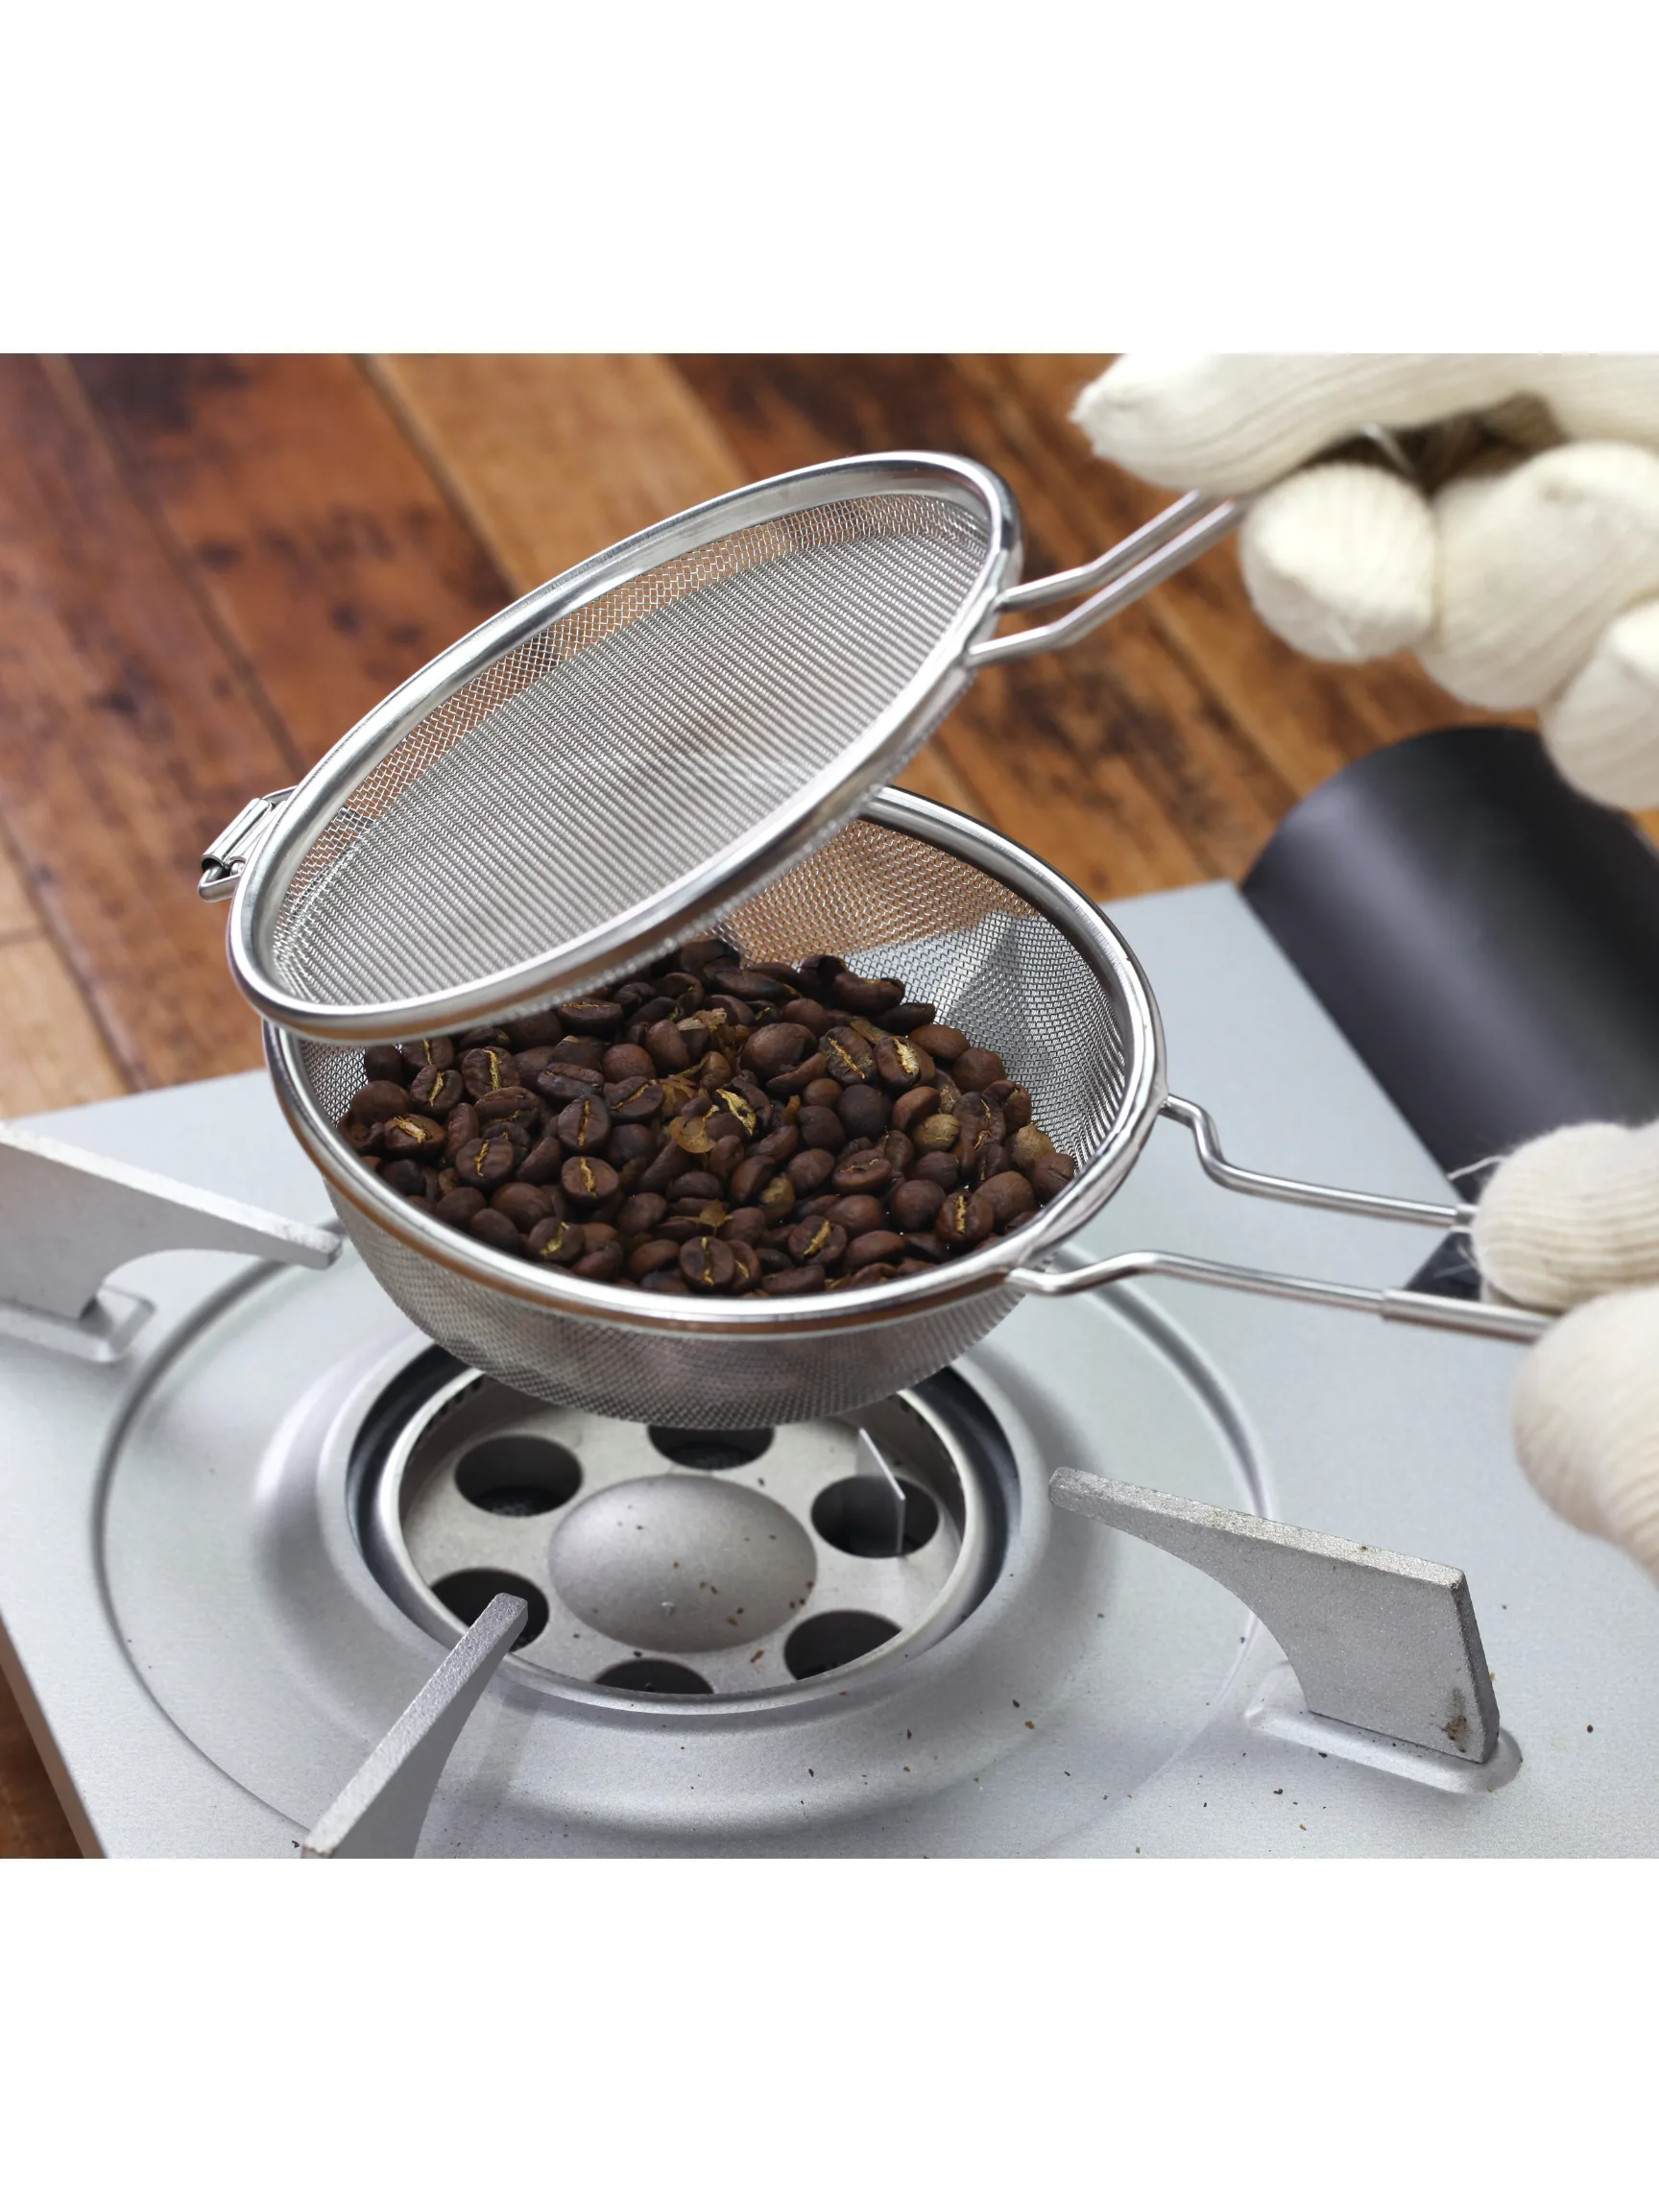 Image of person roasting coffee beans at home.